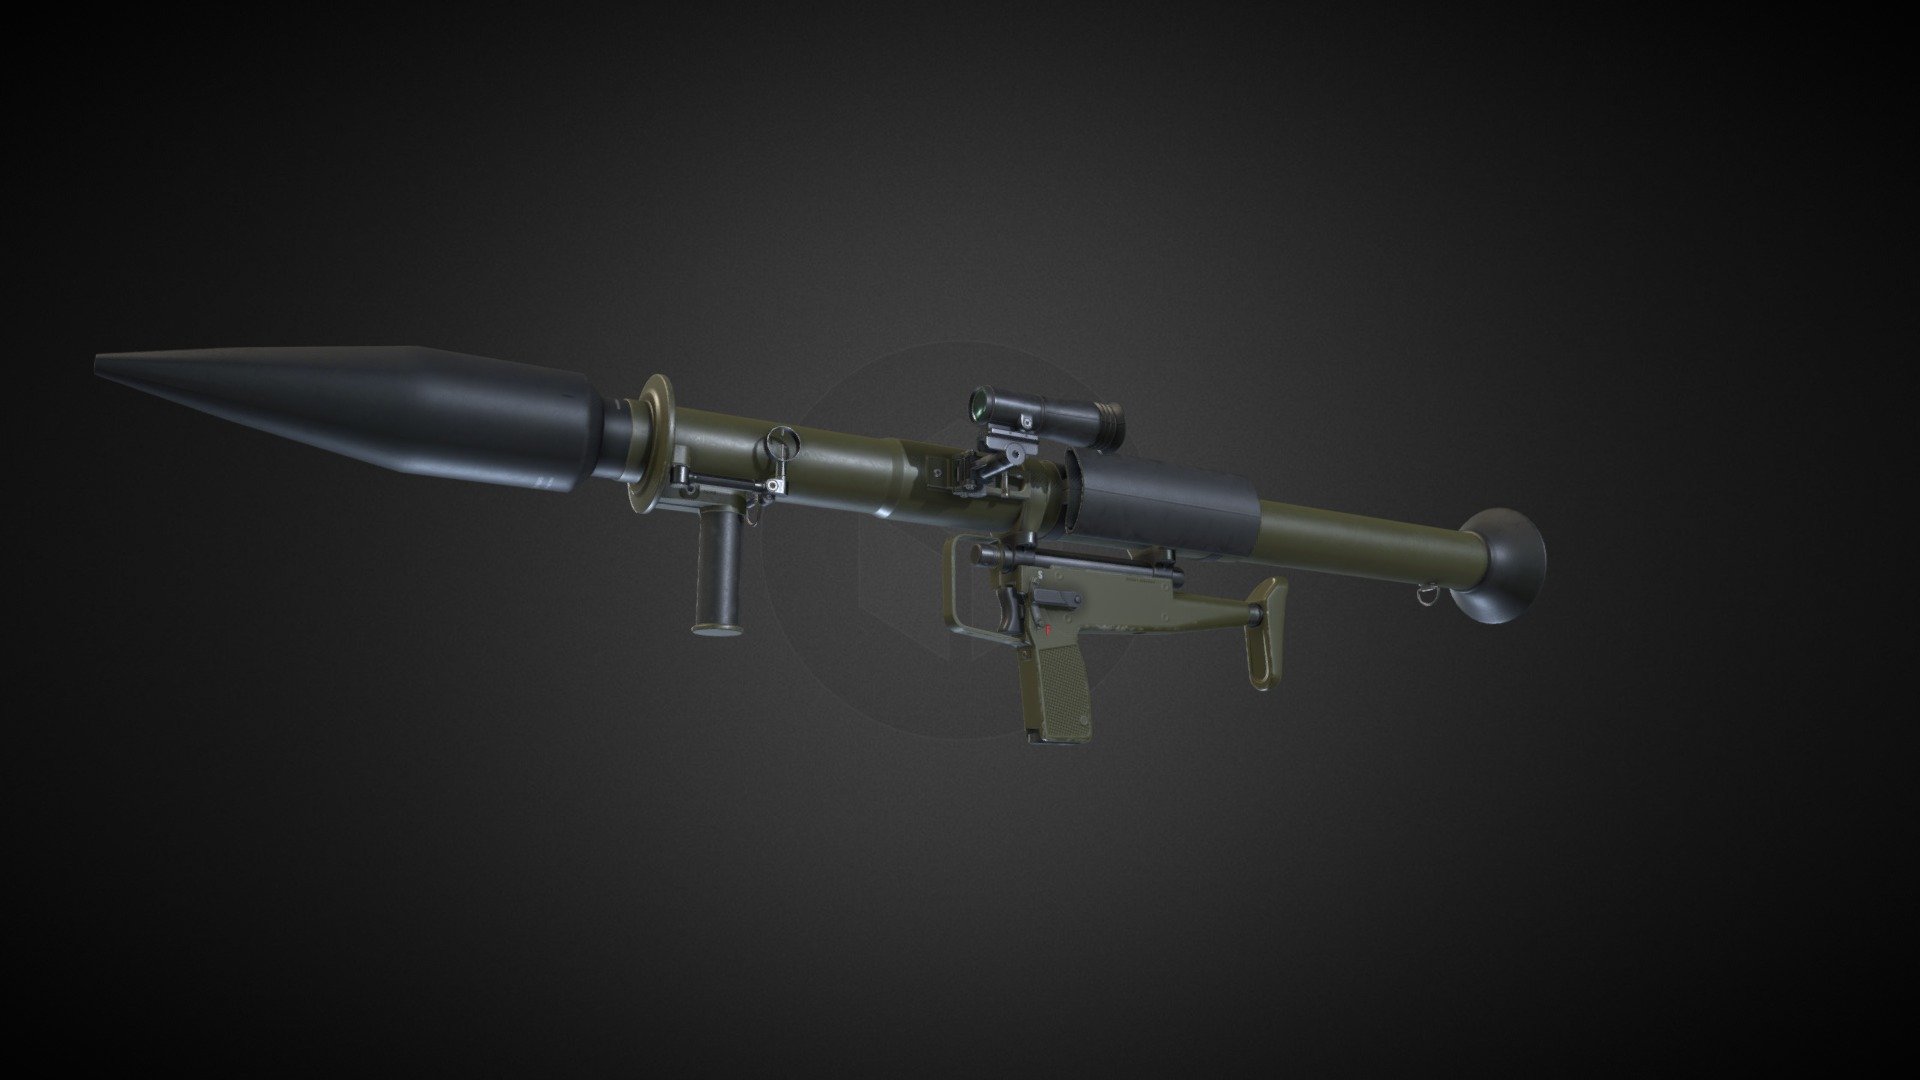 Also known as Panzerfaust Lanze(or just Panzerfaust 2) is West German portable recoilless anti-tank rocket launcher that use 44×537mm rocket cartridges.

Its weirdly overcomplicated as to actually launch rocket you need to use blank bullet from magazine using bolt-action mechanism&hellip;

I modified scope mount to use picatinny rail instead of dovetail so its easier to attach different scope to it, also yes, I included older HEAT warhead, as it just look cooler than than black boring cylinder(logic, I know&hellip;).  

Model is rigged, but there is also version with all parts separated.

It have two PBR Materials in 4K plus separate 2K for rocket.

Verts: 13.7K

Tris: 27K  

Made in Blender 3d model